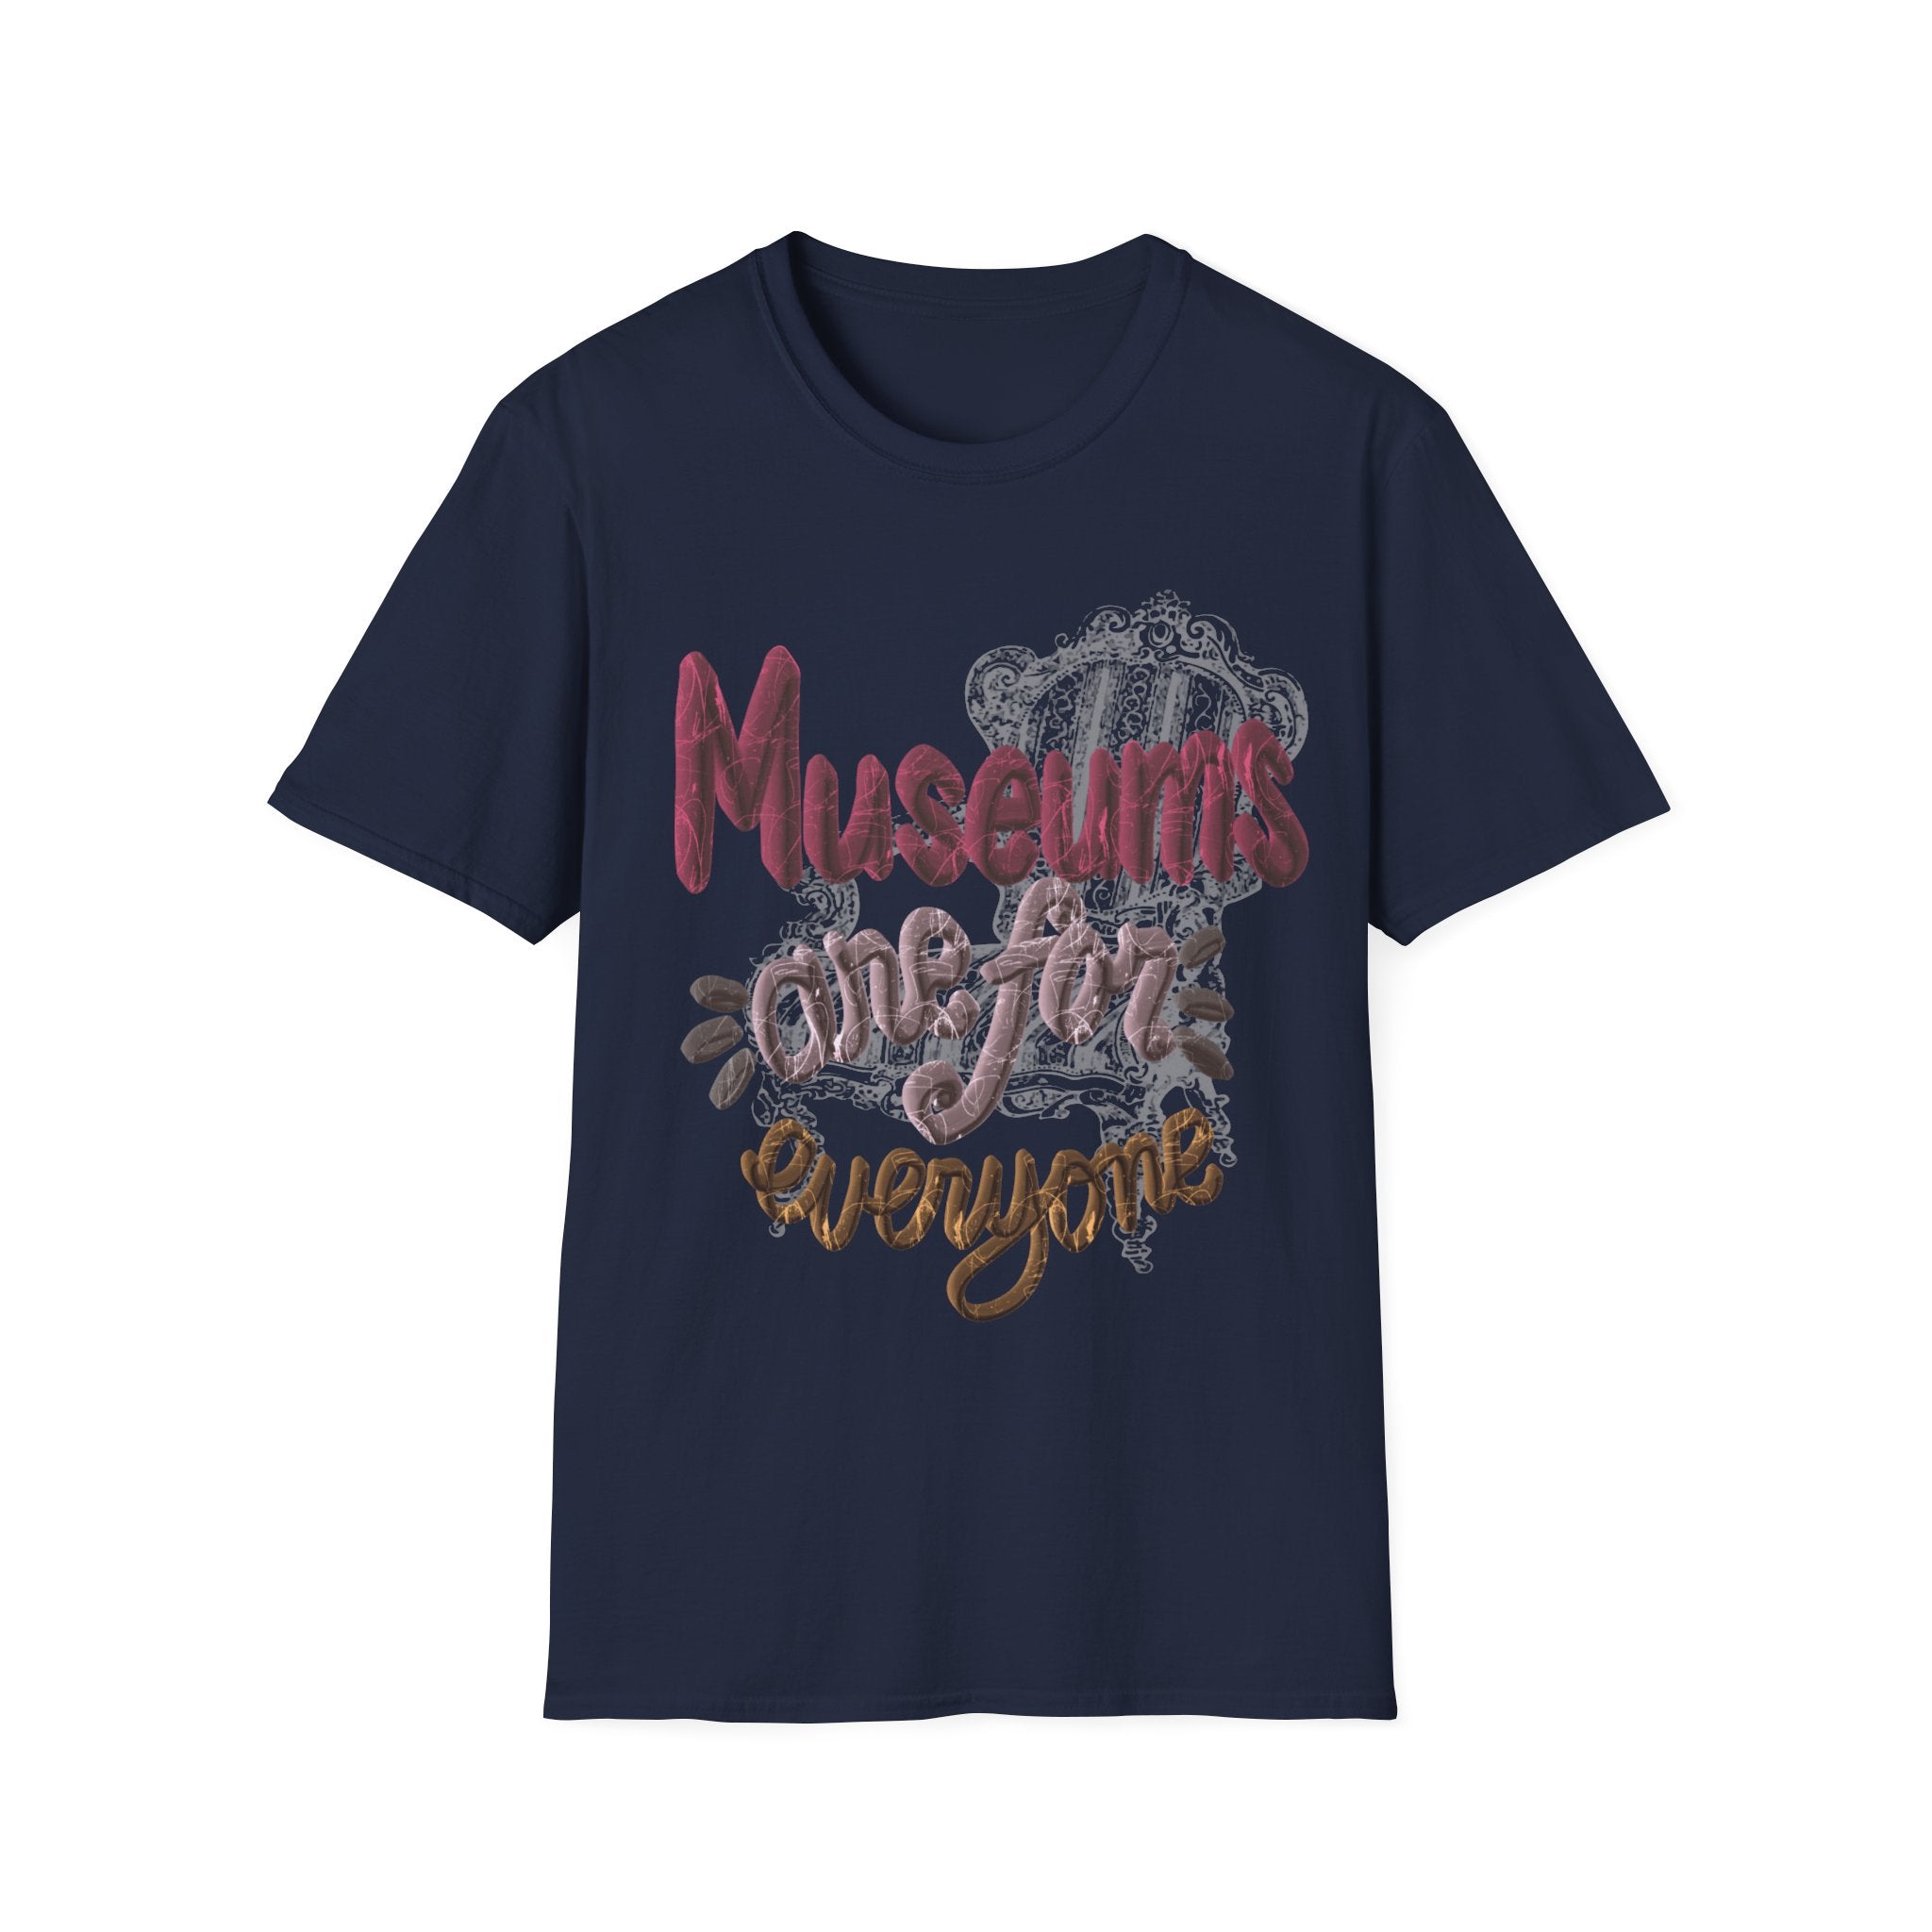 MUSEUMS ARE FOR EVERYONE W CHAIR Unisex Softstyle T-Shirt